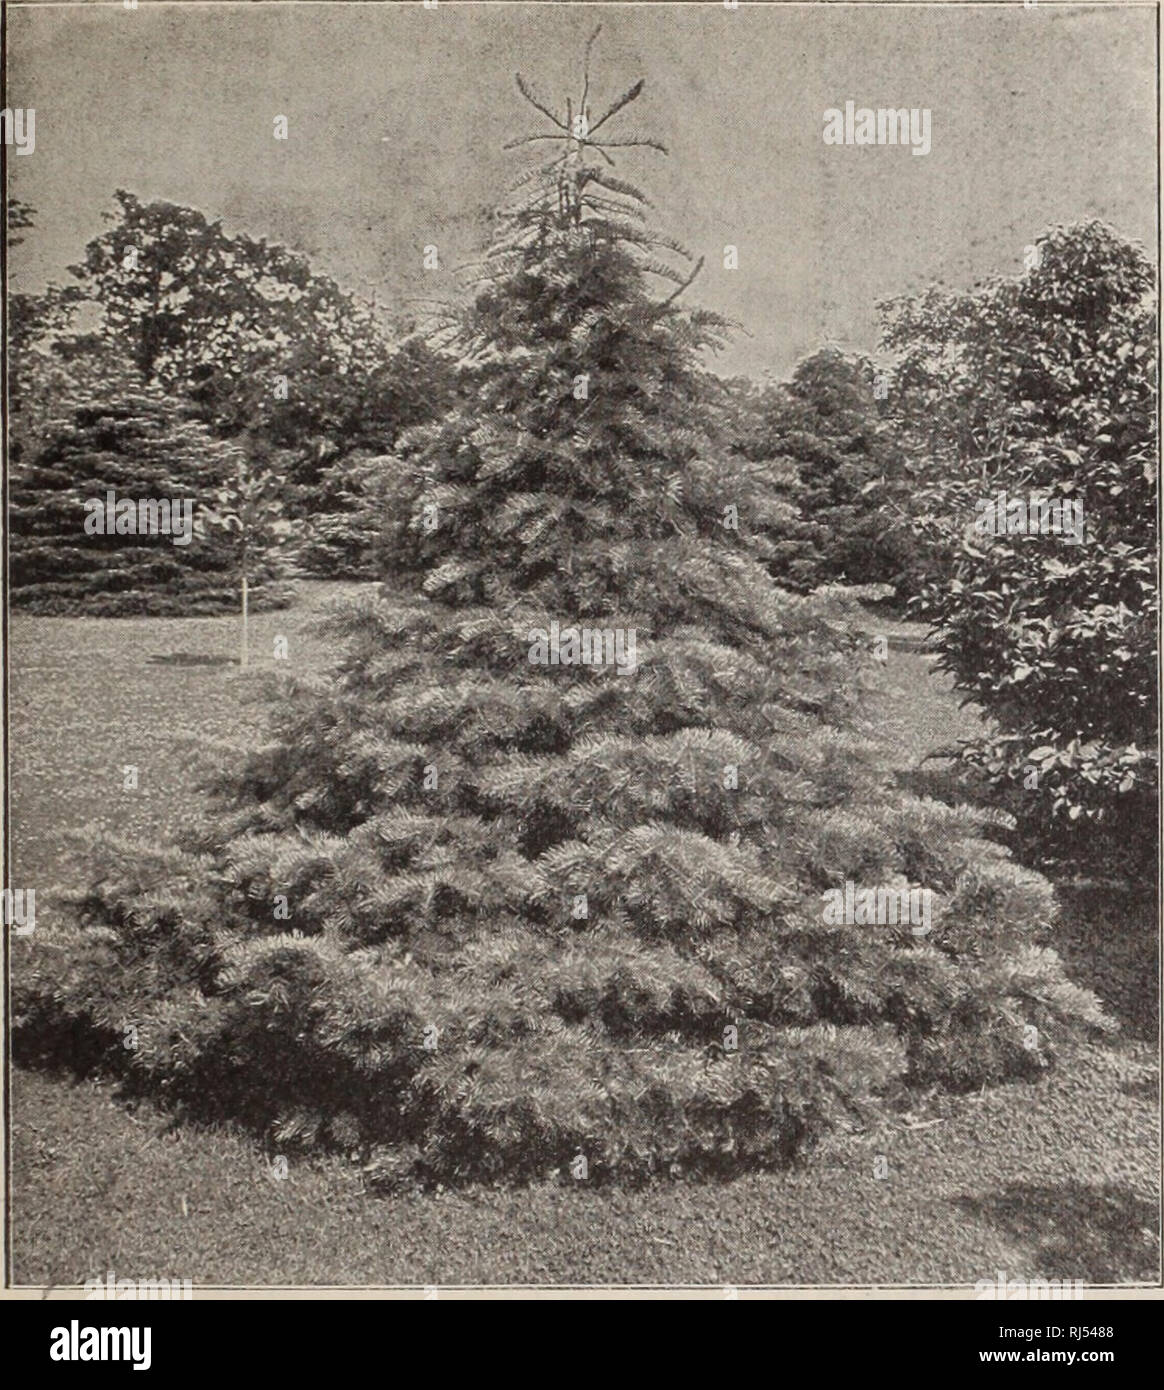 . Choice hardy trees and plants / F.W. Kelsey Nursery Company.. Nursery Catalogue. Choice Trees, Shrubs and Hardy Plants. 21. PiCEA CONCOLOH. CONCOLOR PICEA balsamea. Balm of Gilead Fie. Very hardy; foliage silvery underneath. 50cts. to$l. PICEA Cephalonica. Cephalonian Fie. Sil- very dagger-shaped leaves. $1.50 to $2. PICEA concolor or lasiocarpa. Concoloe Speuce. One of the hardiest and most beauti- ful Evergreens. Tree of graceful, stately habit. Large, broad, silvery green foliage. A rare and exceedingly choice variety. $vi to $5. PICEA concolor violacea. Silveb Fie. Leaves similar in size Stock Photo